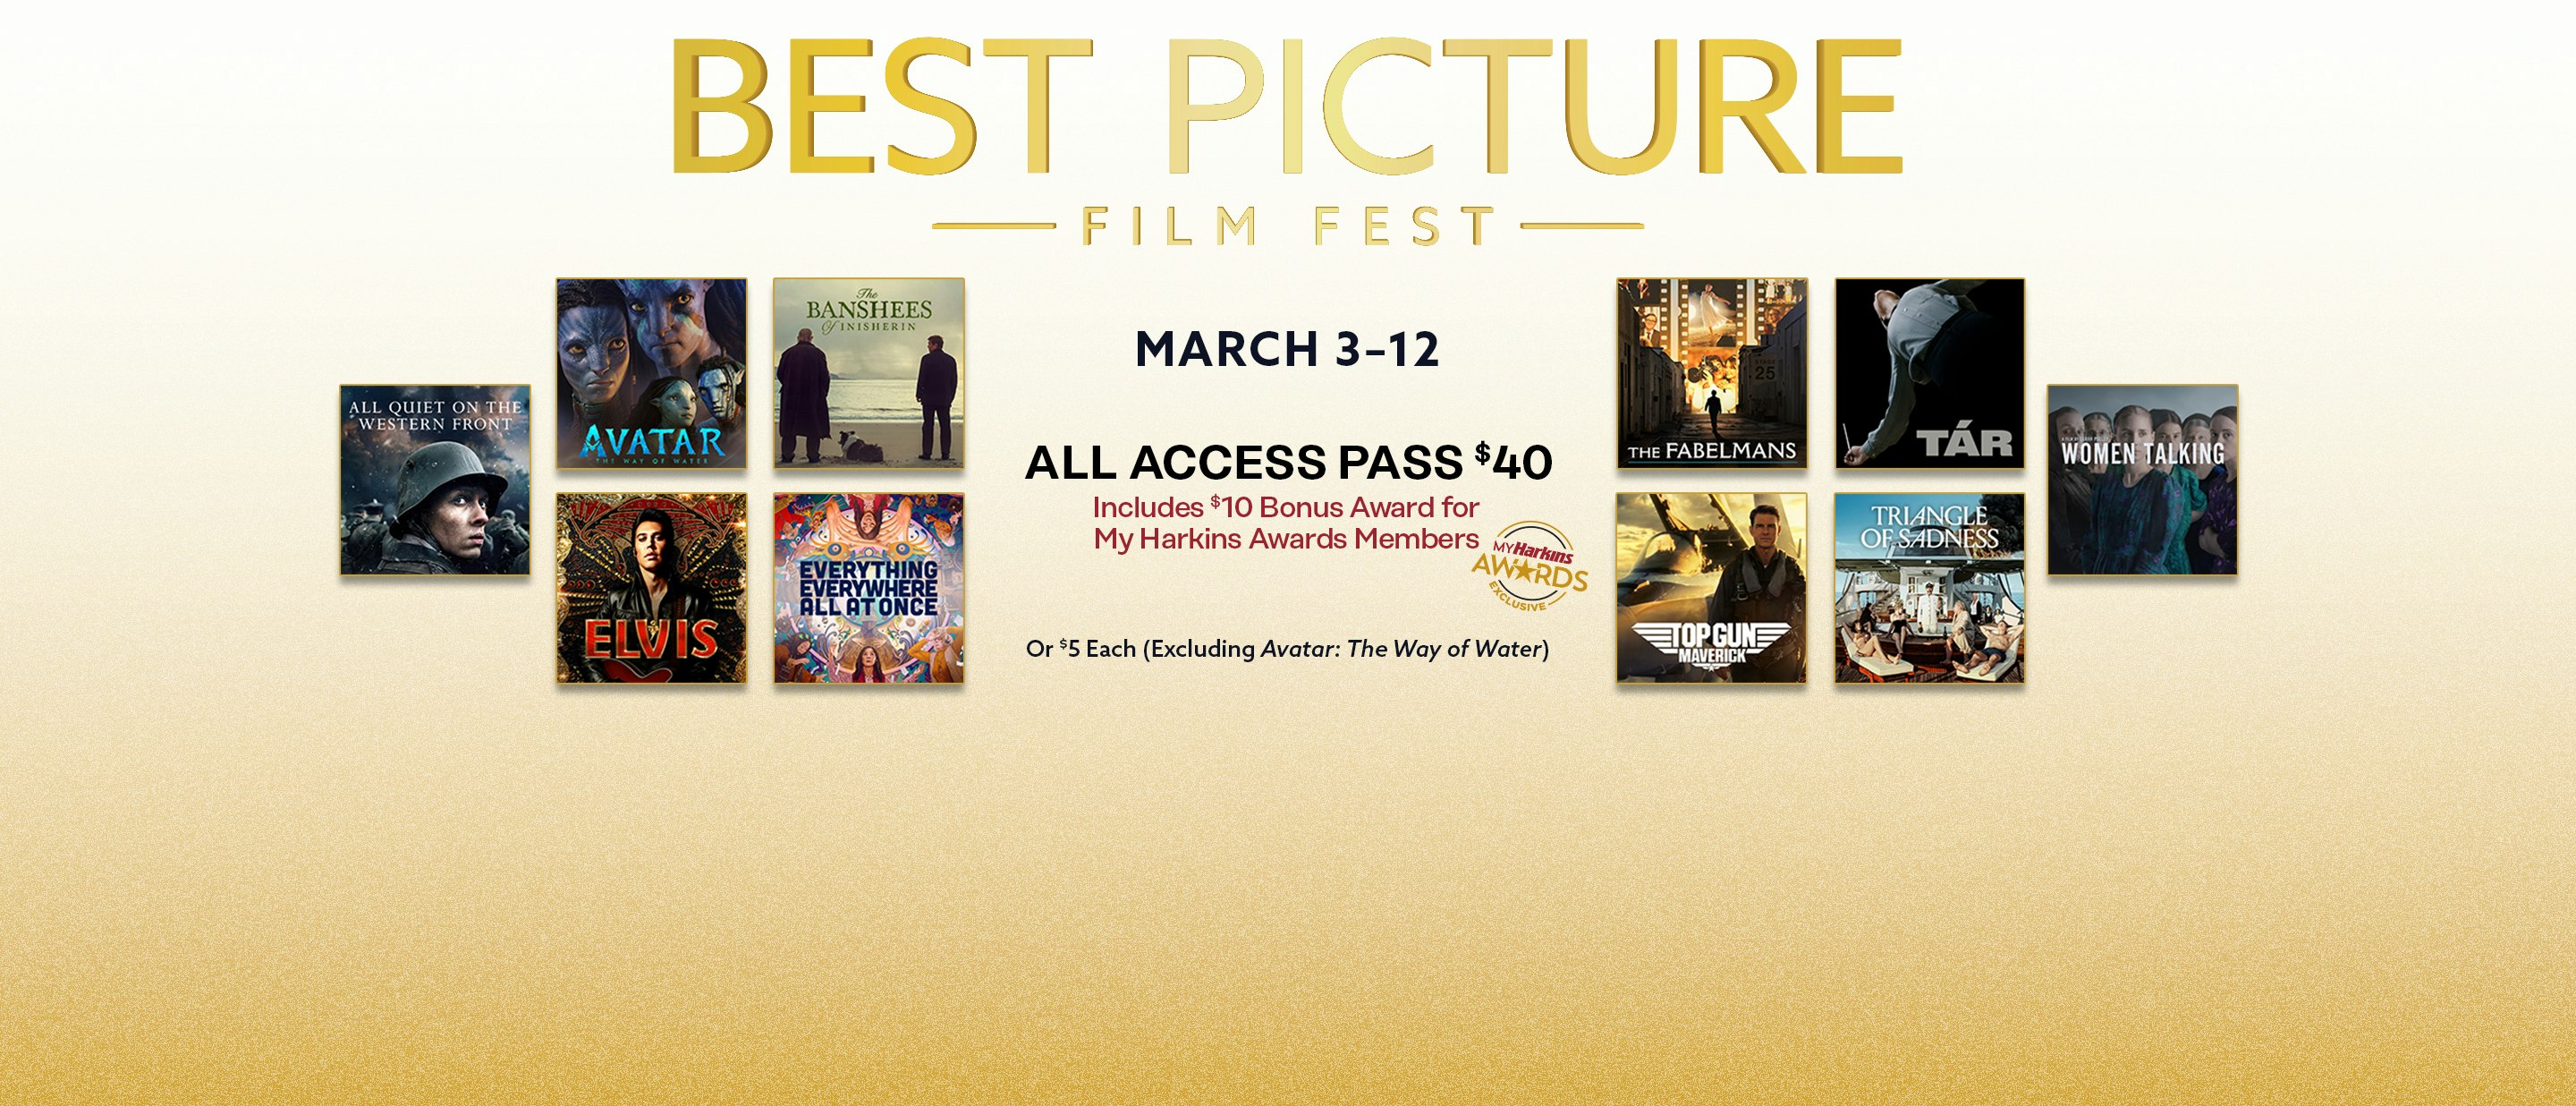 10 Oscar nominated film posters featured in Harkins Best Picture Film Festival. Get Tickets Now!